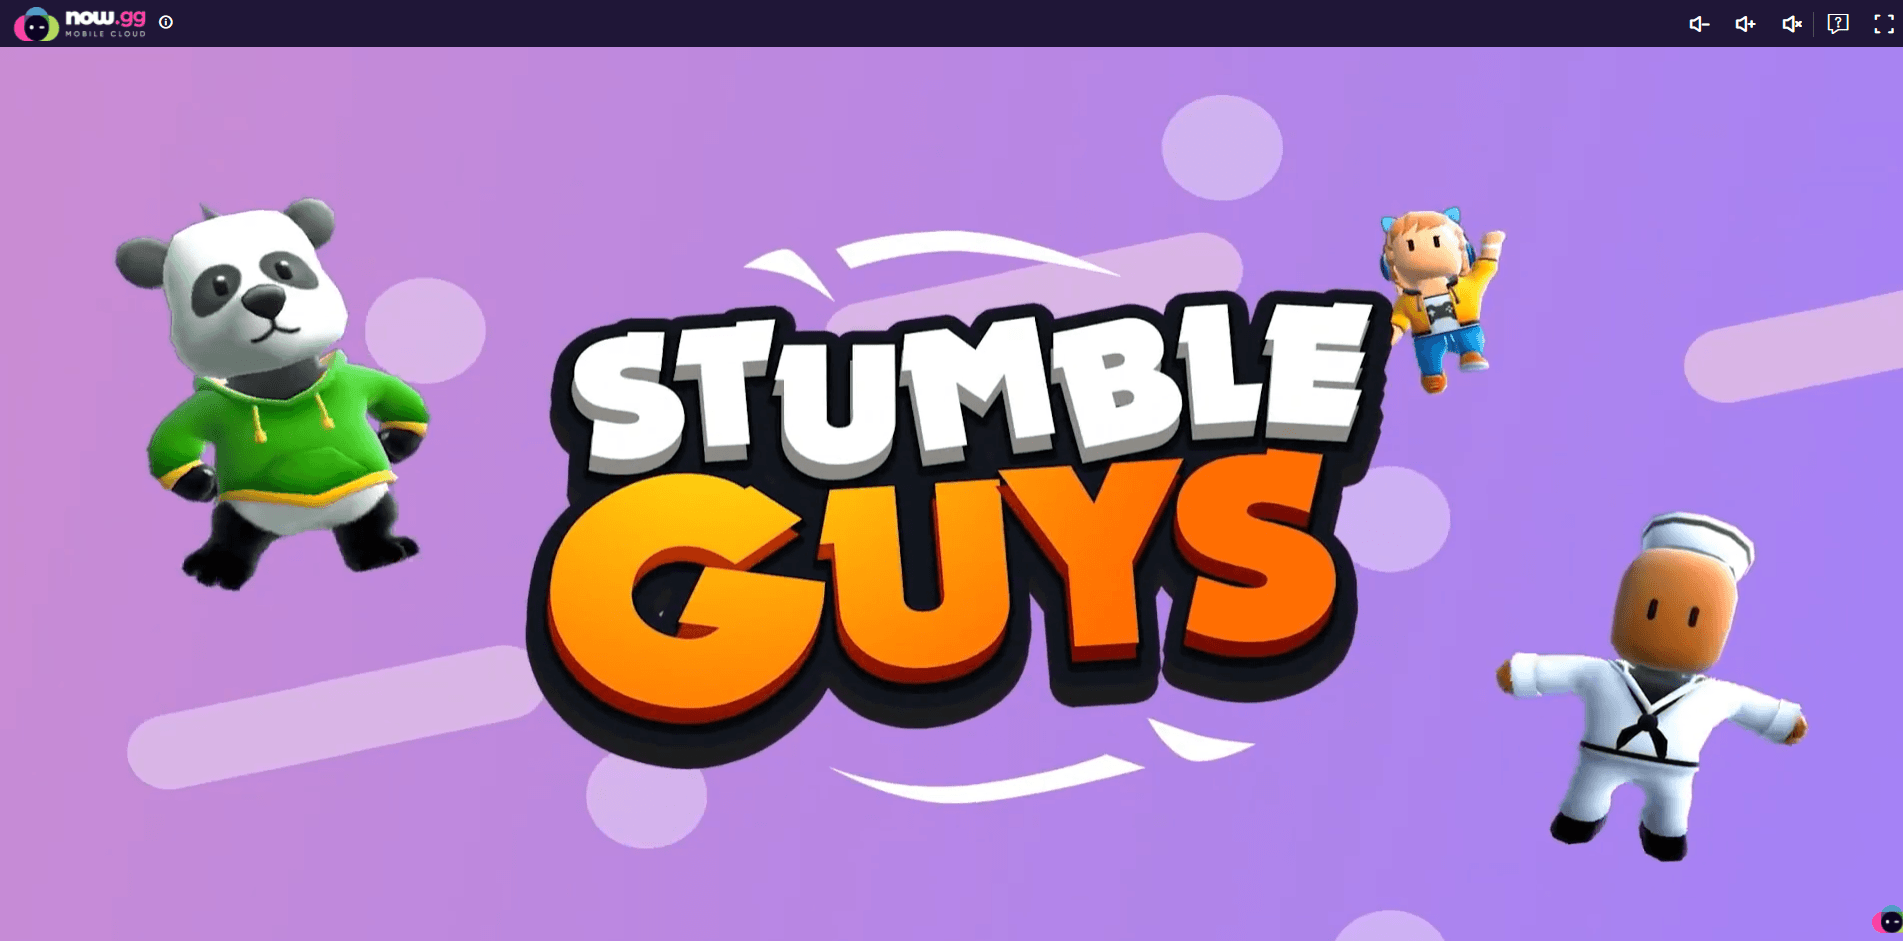 Stumble Guys - Plans for the weekend? Playing #StumbleGuys with my friends.  😎